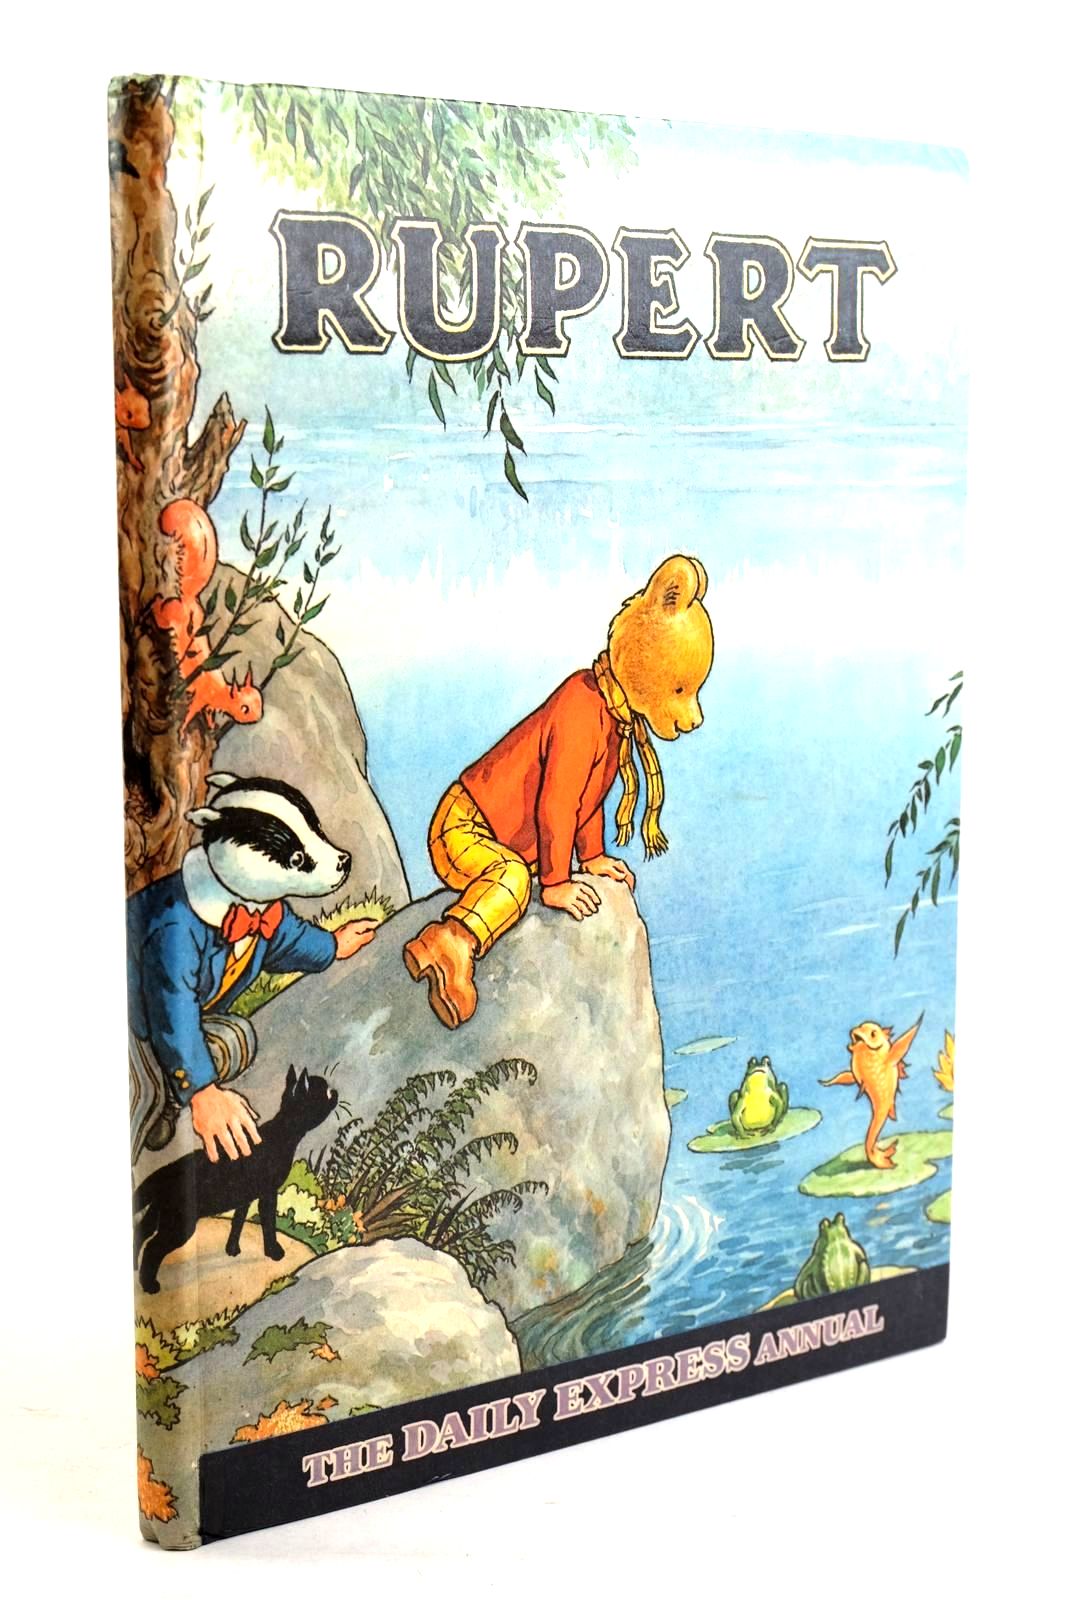 Photo of RUPERT ANNUAL 1969 written by Bestall, Alfred illustrated by Bestall, Alfred published by Daily Express (STOCK CODE: 1320524)  for sale by Stella & Rose's Books